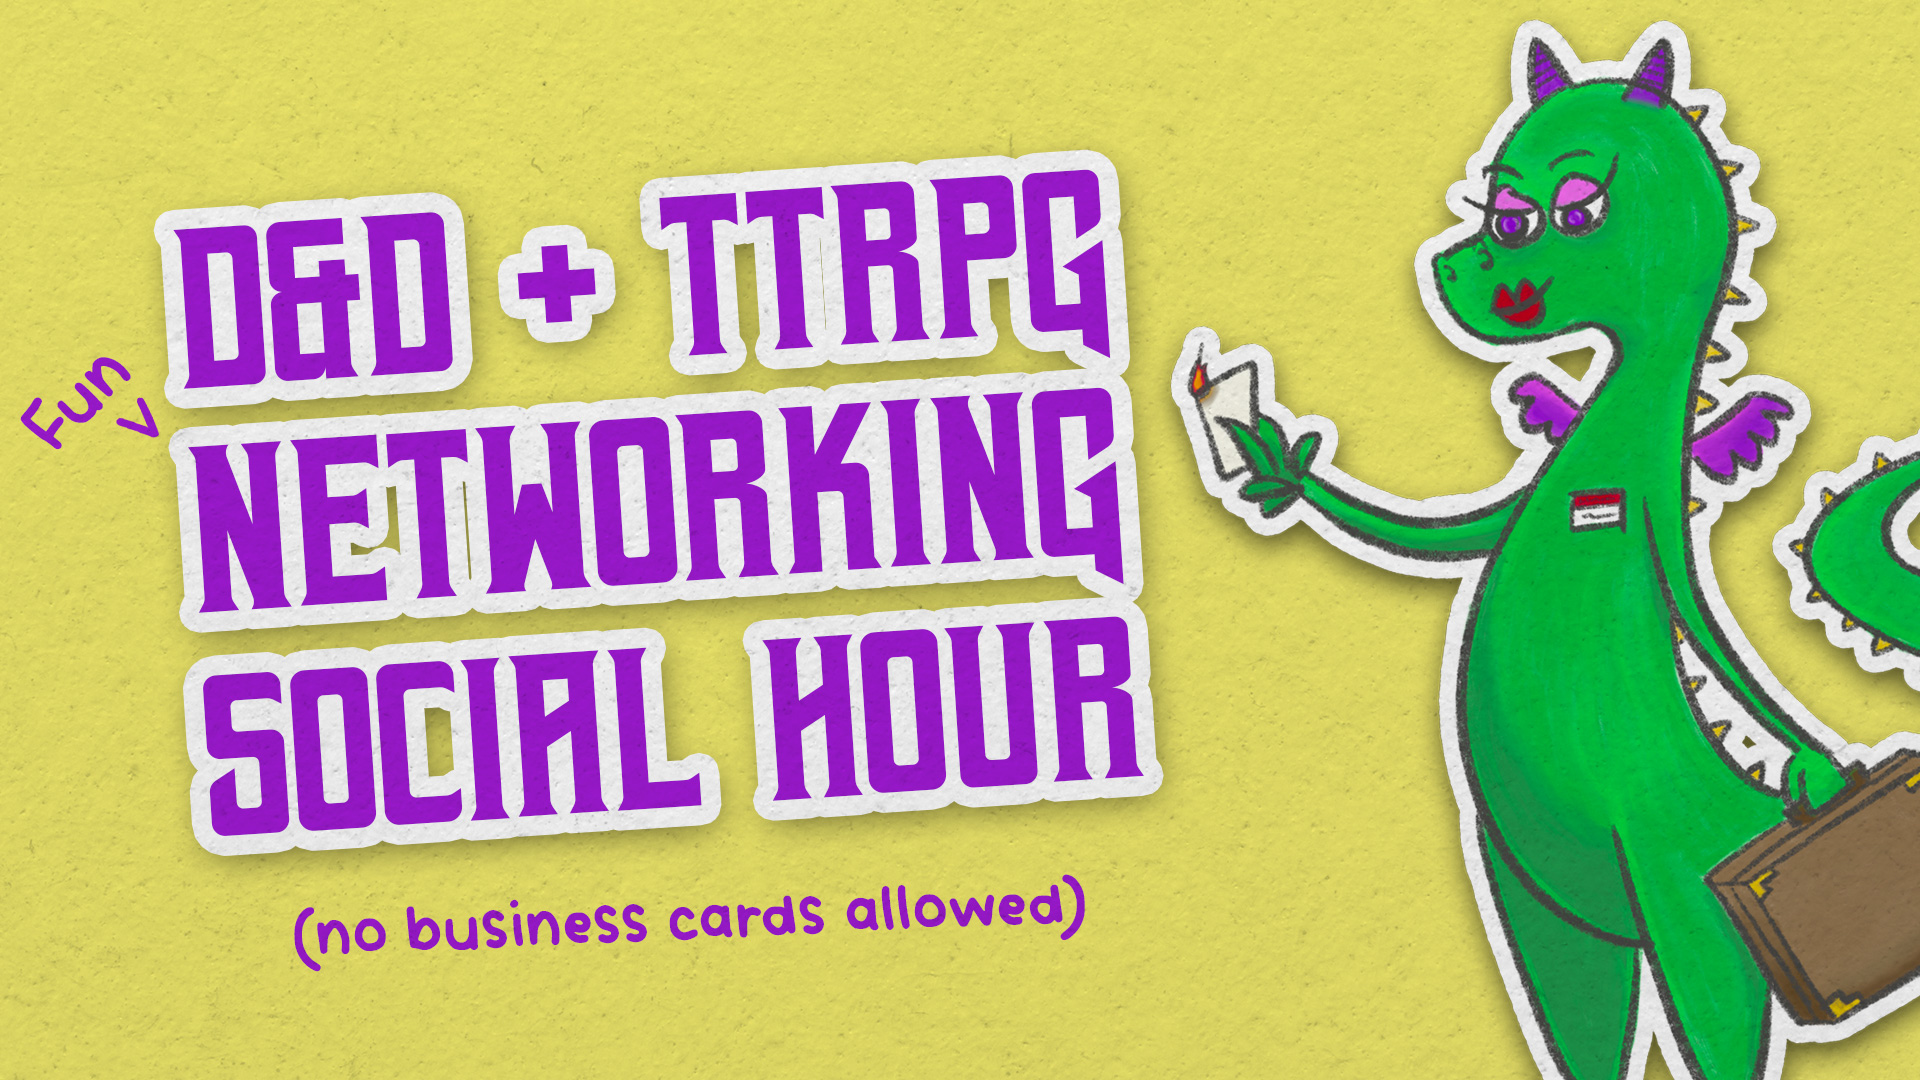 D&D and TTRPG Networking Social Hour Event Graphic